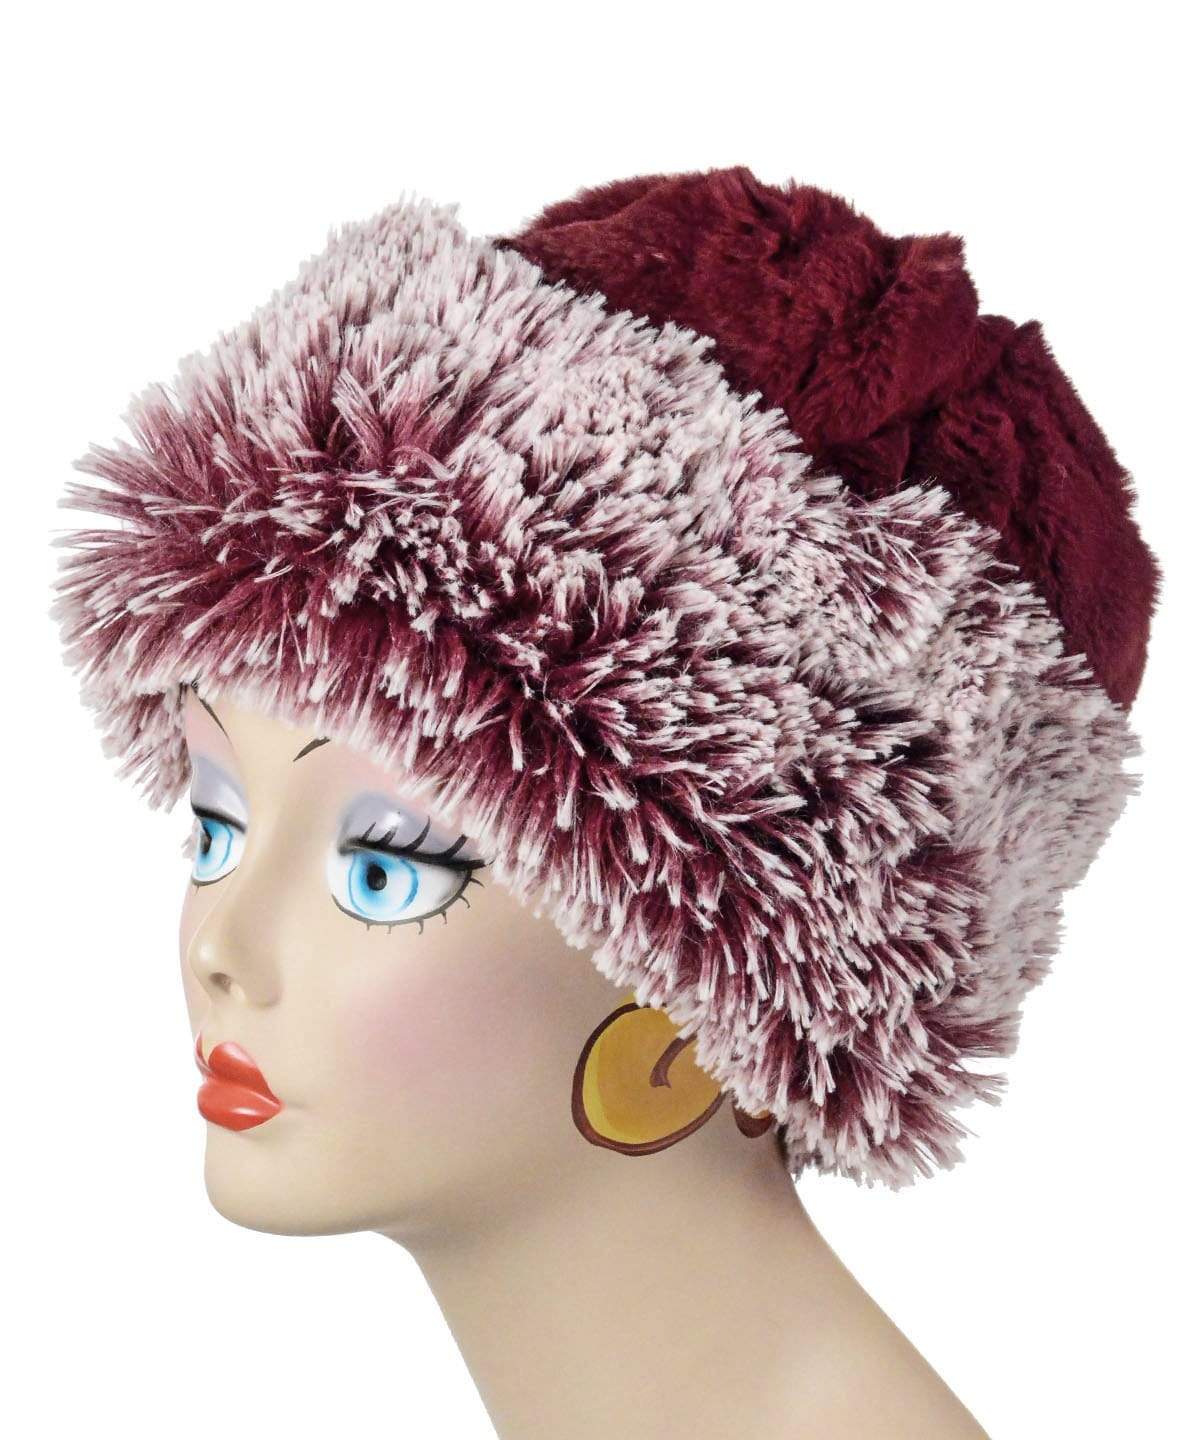 Beanie Hat shown reversed in Cherry Cordial and Cranberry Fox Faux Fur with Pom. Handmade by Pandemonium Millinery in Seattle, WA.